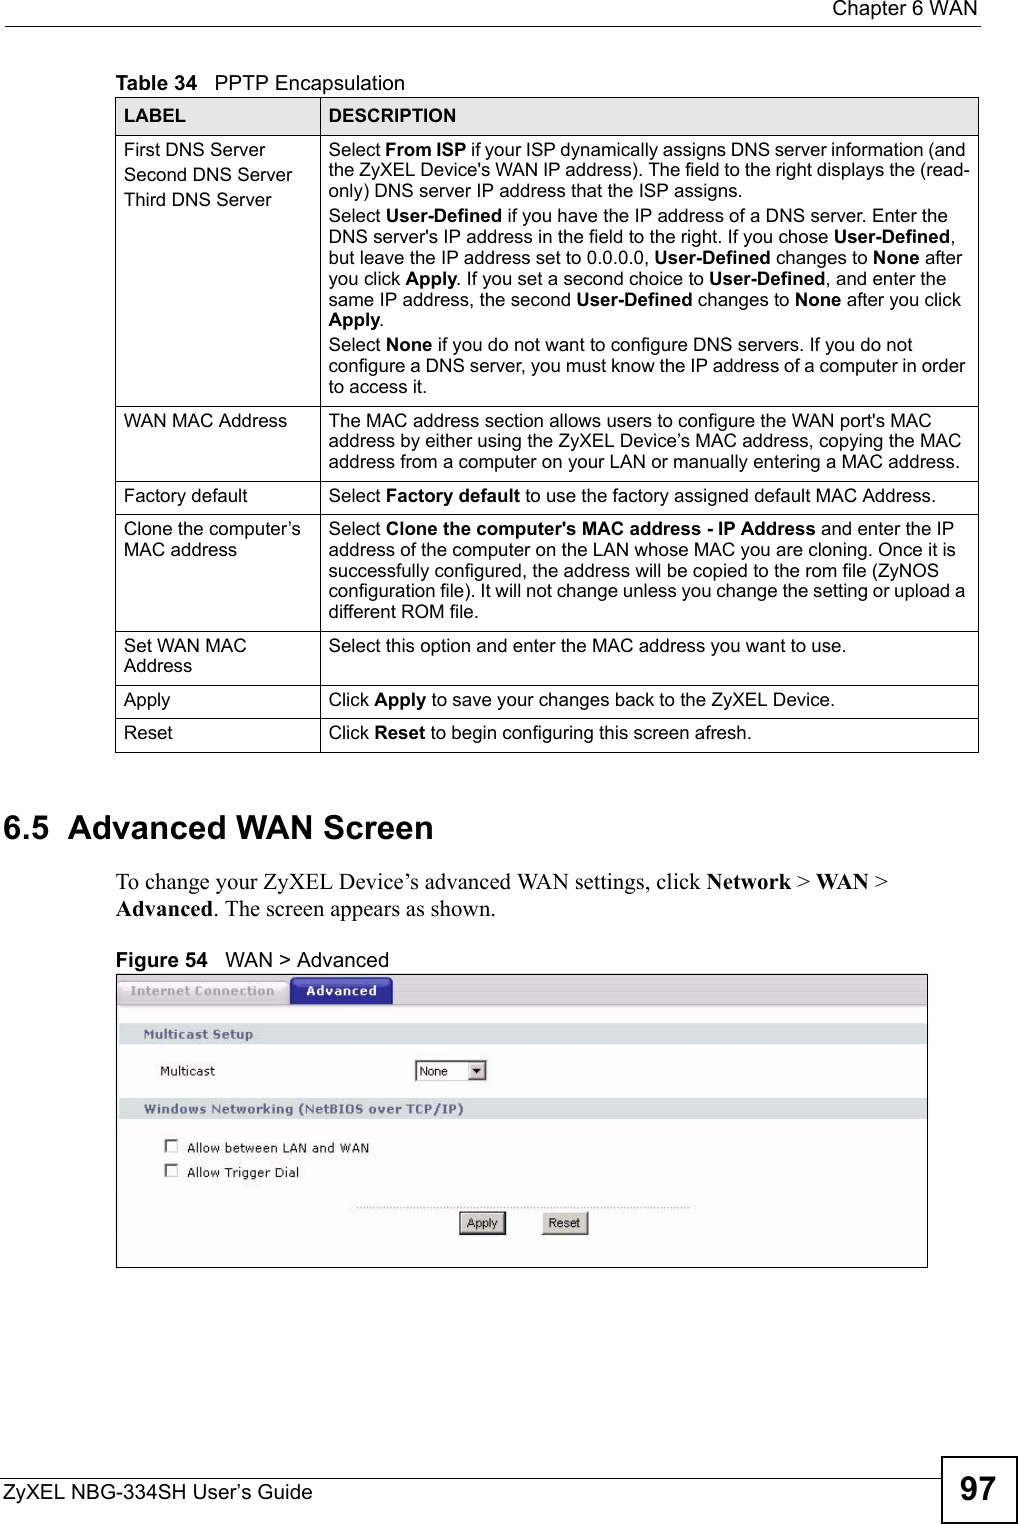  Chapter 6 WANZyXEL NBG-334SH User’s Guide 976.5  Advanced WAN ScreenTo change your ZyXEL Device’s advanced WAN settings, click Network &gt; WAN  &gt; Advanced. The screen appears as shown.Figure 54   WAN &gt; AdvancedFirst DNS ServerSecond DNS ServerThird DNS Server Select From ISP if your ISP dynamically assigns DNS server information (and the ZyXEL Device&apos;s WAN IP address). The field to the right displays the (read-only) DNS server IP address that the ISP assigns. Select User-Defined if you have the IP address of a DNS server. Enter the DNS server&apos;s IP address in the field to the right. If you chose User-Defined, but leave the IP address set to 0.0.0.0, User-Defined changes to None after you click Apply. If you set a second choice to User-Defined, and enter the same IP address, the second User-Defined changes to None after you click Apply. Select None if you do not want to configure DNS servers. If you do not configure a DNS server, you must know the IP address of a computer in order to access it.WAN MAC Address The MAC address section allows users to configure the WAN port&apos;s MAC address by either using the ZyXEL Device’s MAC address, copying the MAC address from a computer on your LAN or manually entering a MAC address. Factory default Select Factory default to use the factory assigned default MAC Address.Clone the computer’s MAC addressSelect Clone the computer&apos;s MAC address - IP Address and enter the IP address of the computer on the LAN whose MAC you are cloning. Once it is successfully configured, the address will be copied to the rom file (ZyNOS configuration file). It will not change unless you change the setting or upload a different ROM file. Set WAN MAC AddressSelect this option and enter the MAC address you want to use.Apply Click Apply to save your changes back to the ZyXEL Device.Reset Click Reset to begin configuring this screen afresh.Table 34   PPTP EncapsulationLABEL DESCRIPTION